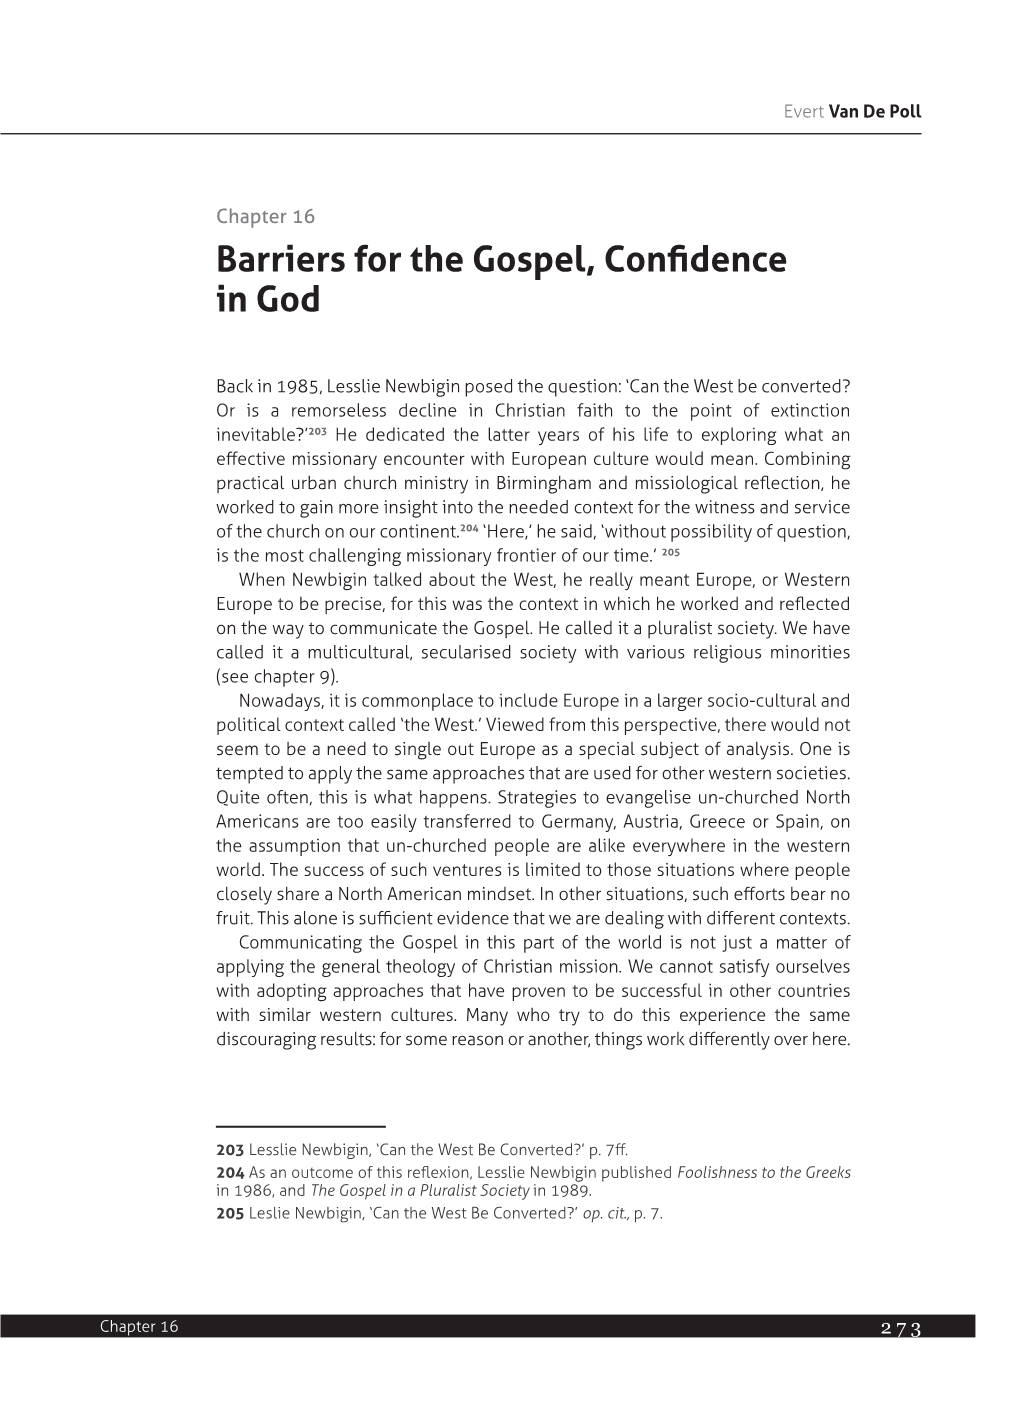 Barriers for the Gospel, Confidence in God